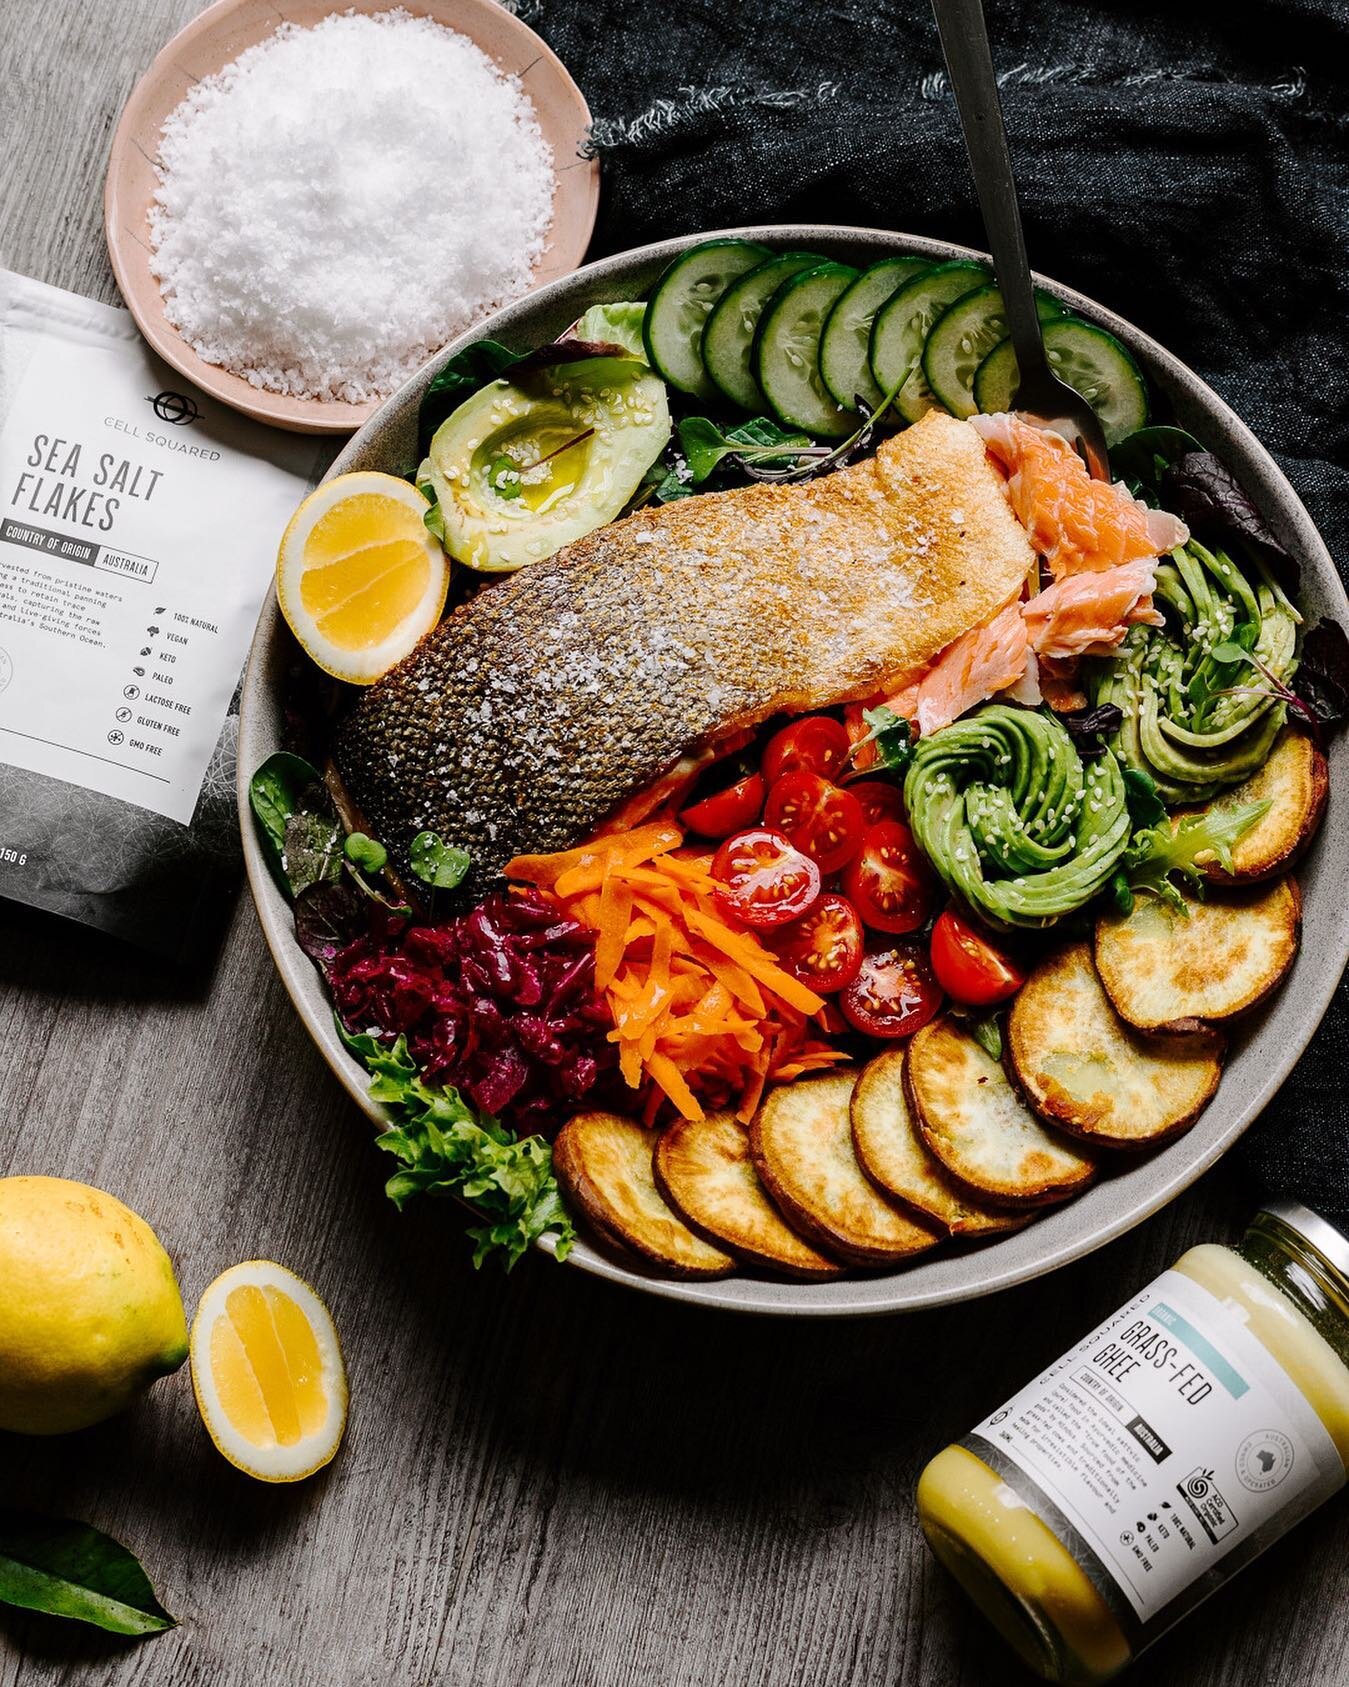 This bowl may look soFISHticated 😂 but it&rsquo;s a simple meal of wild-caught, melt in your mouth salmon cooked in copious amounts of @cellsquared organic ghee to make the skin EXTRA crispy, roasted purple sweet potato, creamy avocado and salad veg